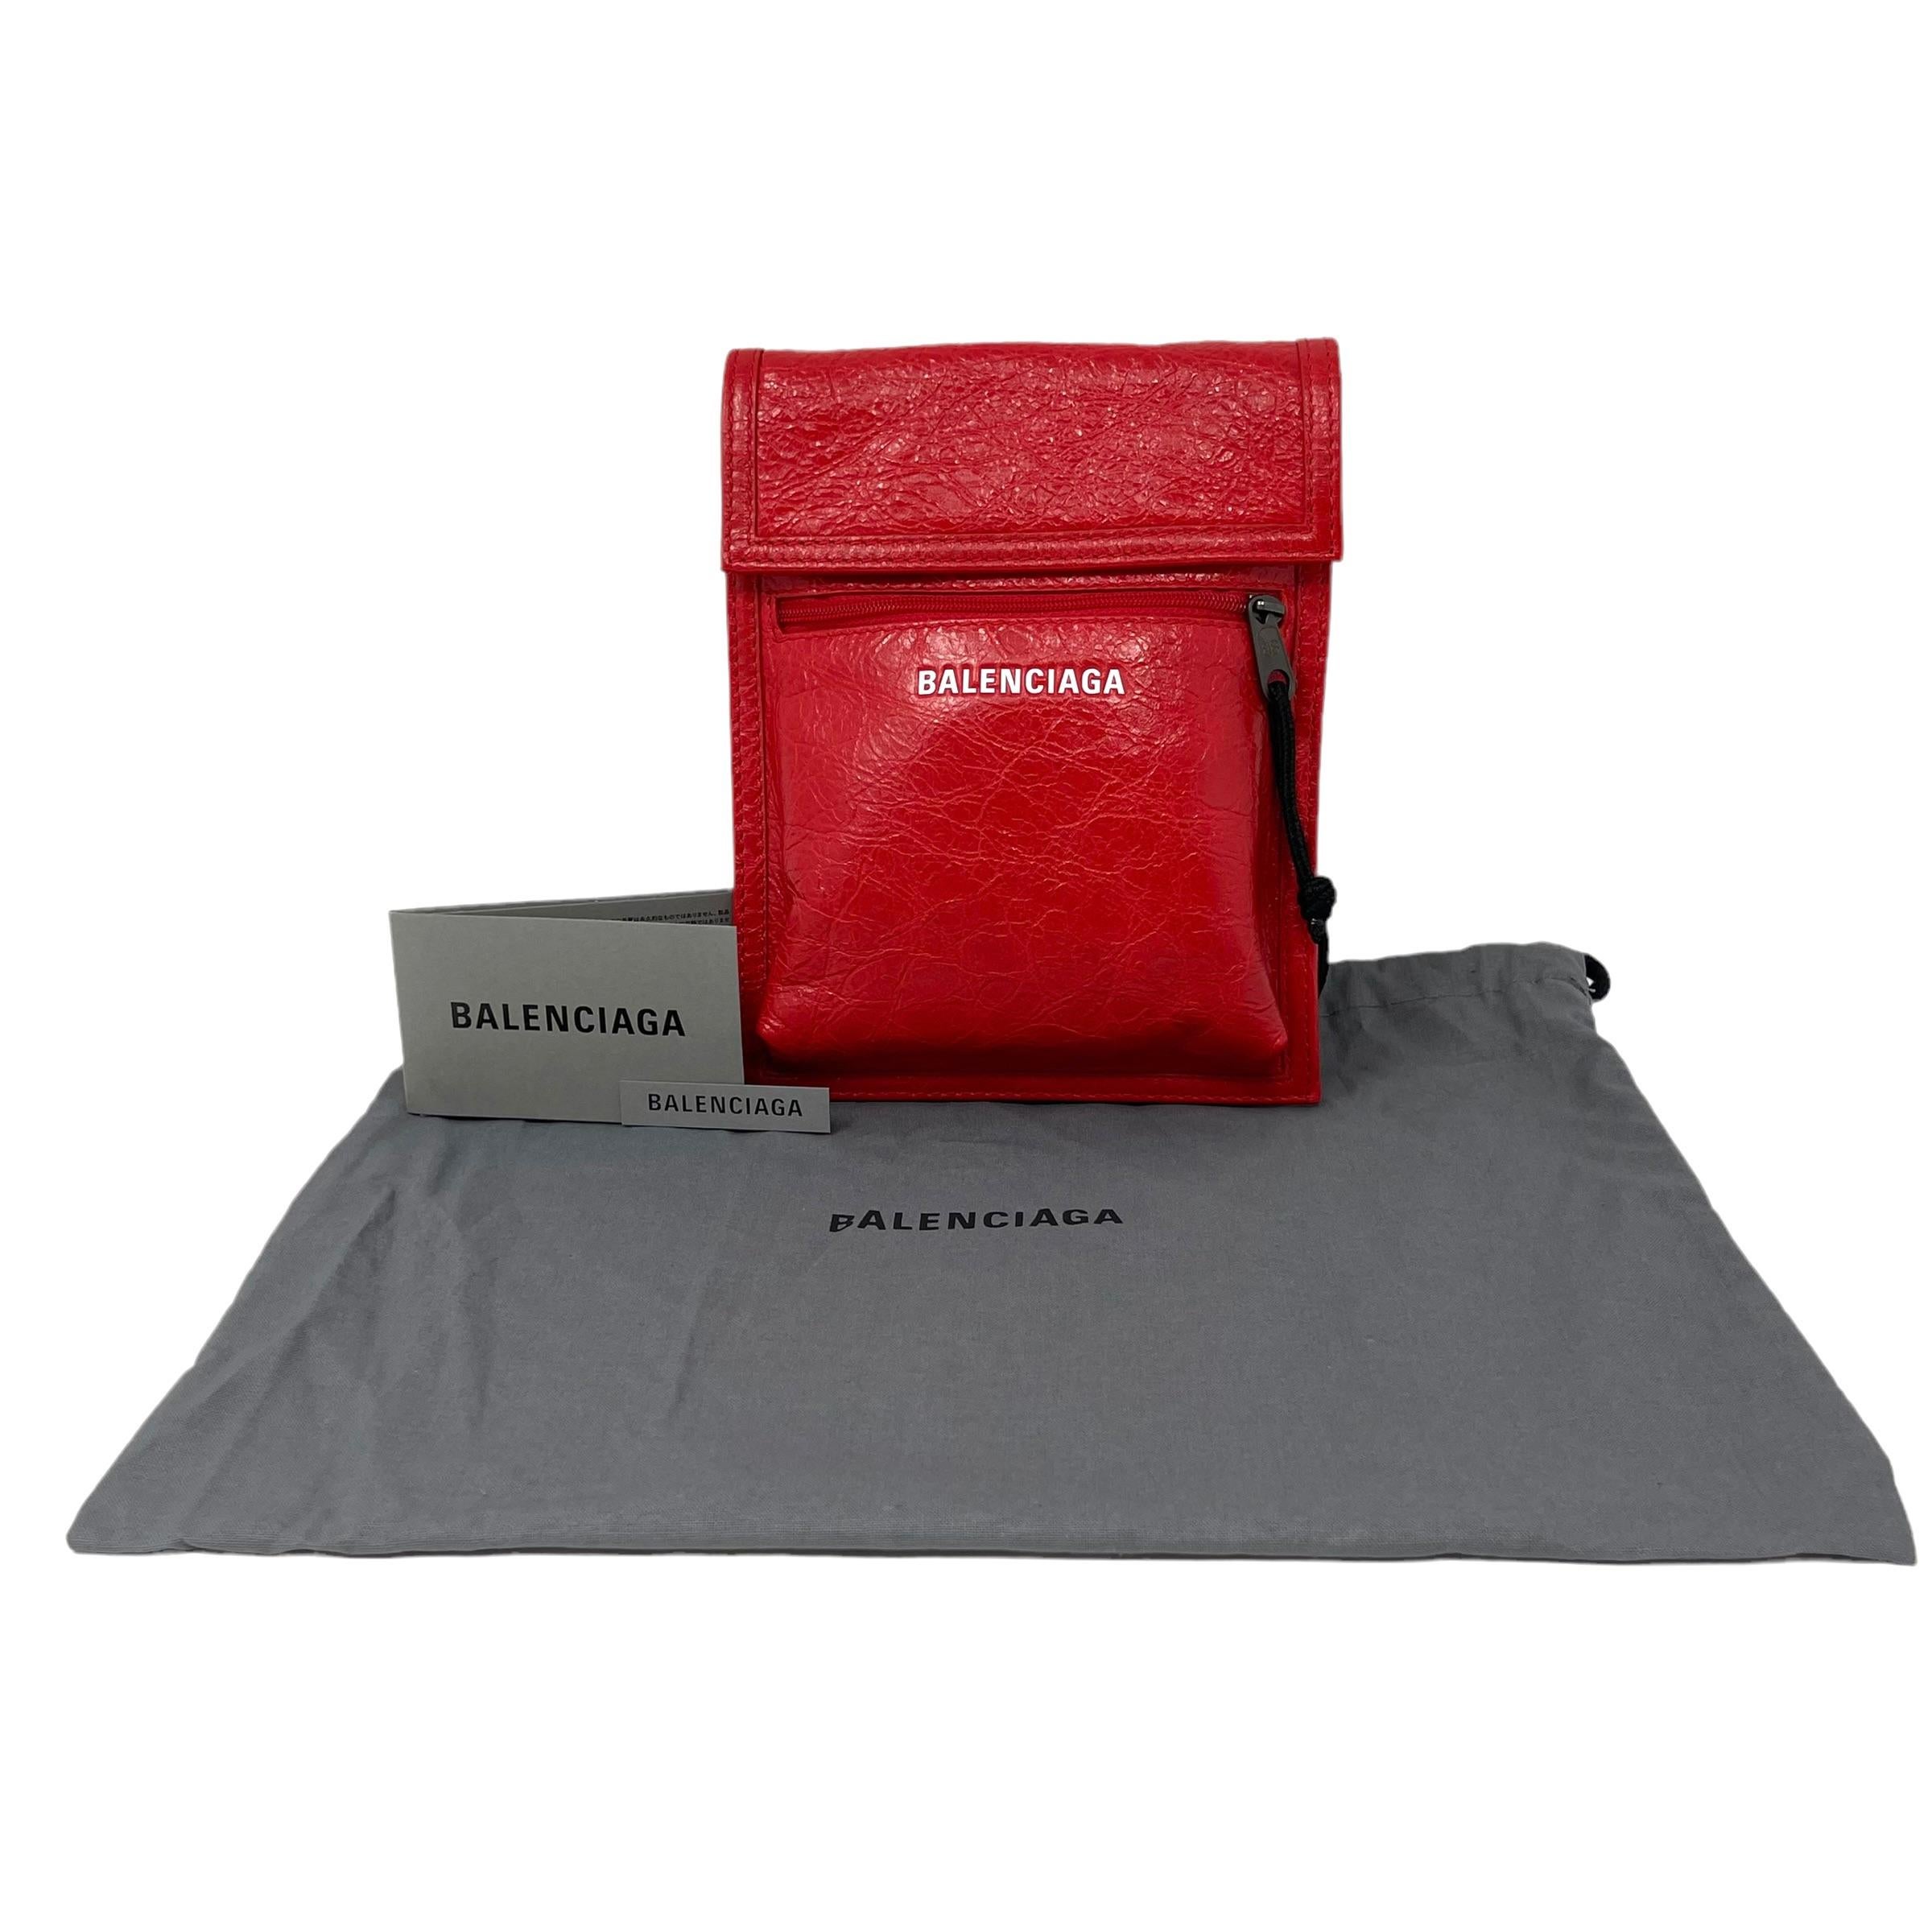 NEW Balenciaga Red Explorer Cracked Leather Pouch Crossbody Bag For Sale 11